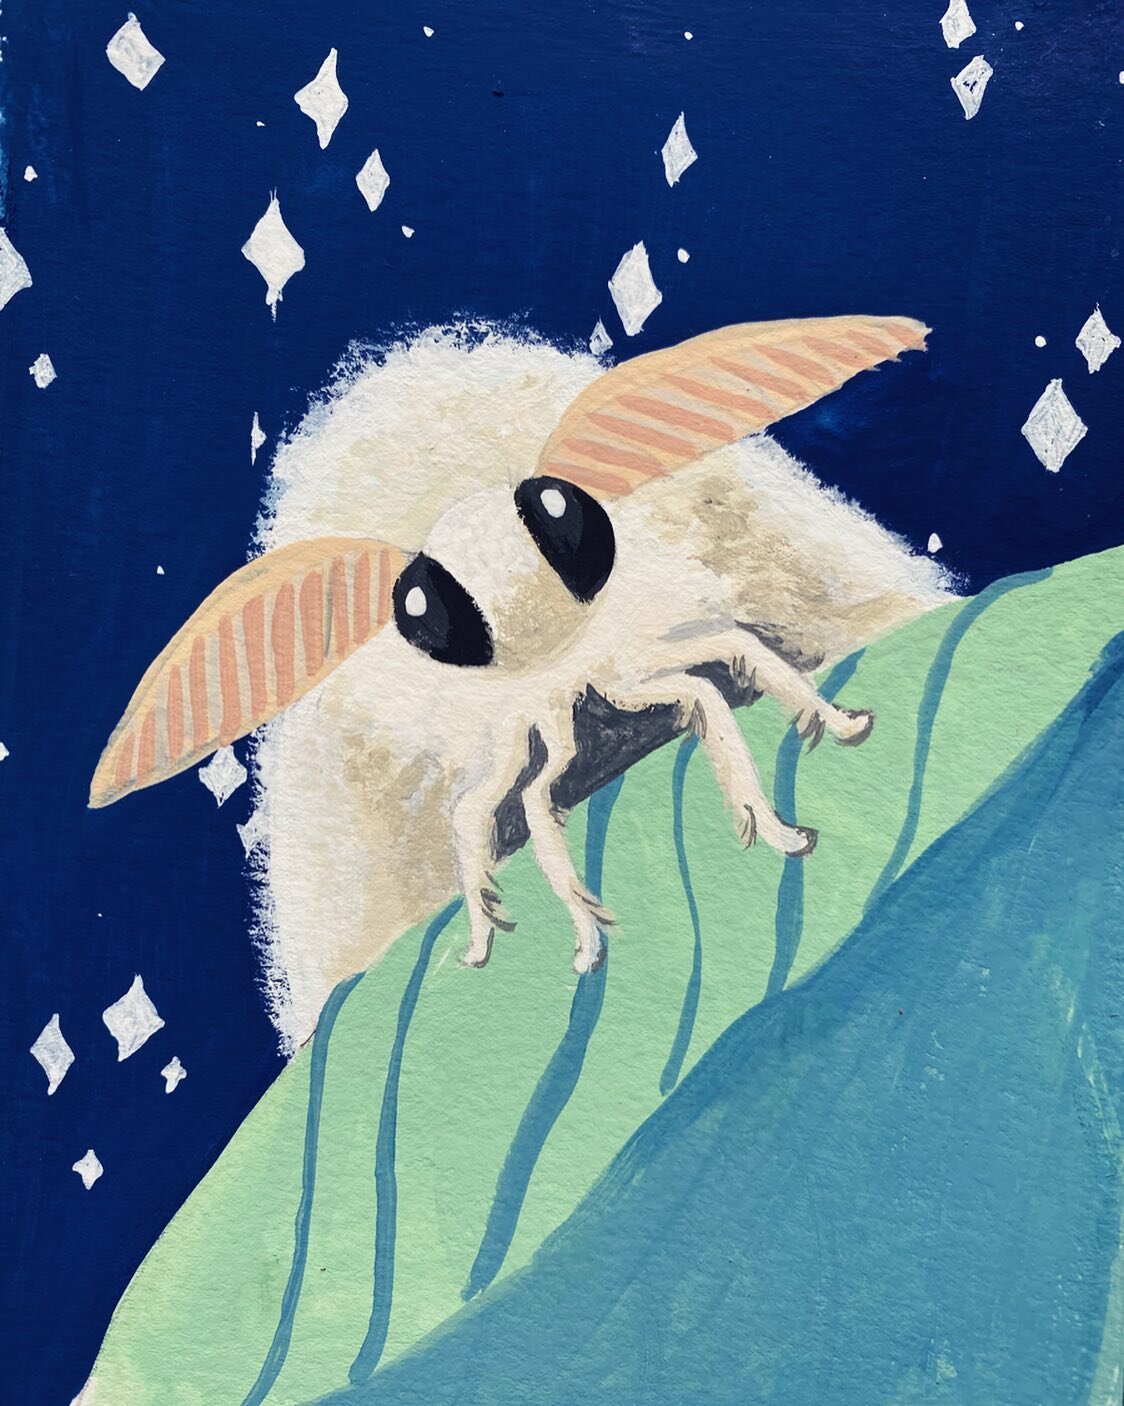 I think when the character developers for Grogu were brainstorming, The Poodle Moth was used as a reference. Just saying. 
#venezuelanpoodlemoth 

.
.
.
.
#poodlemoth #grogu #gouache #gouachepainting #gouacheillustration #practicemakesprogress #mood 